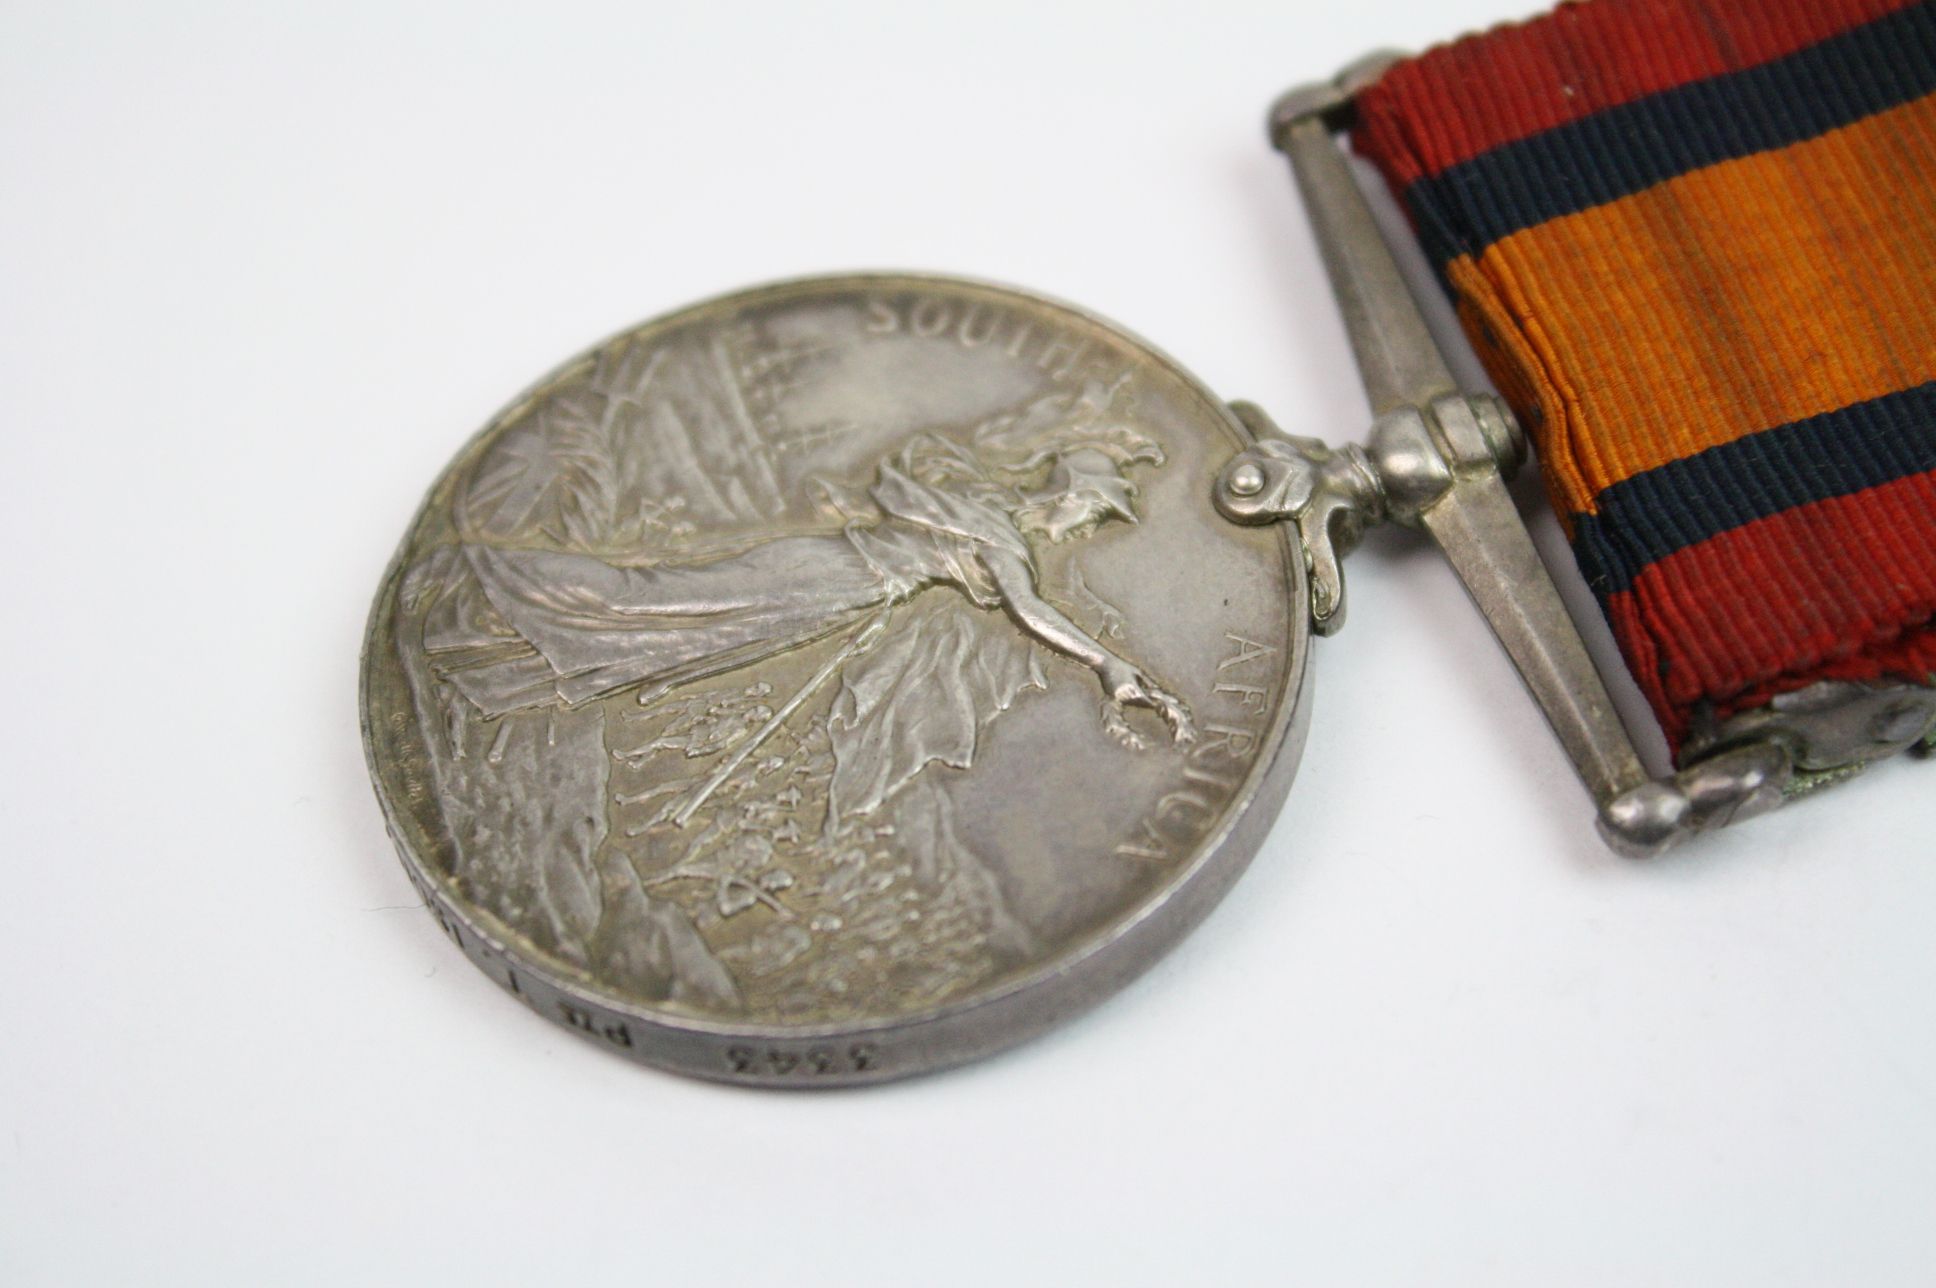 A Full Size Queens South Africa Medal With Five Bars To Include The Transvaal, Orange Free State, - Image 10 of 14